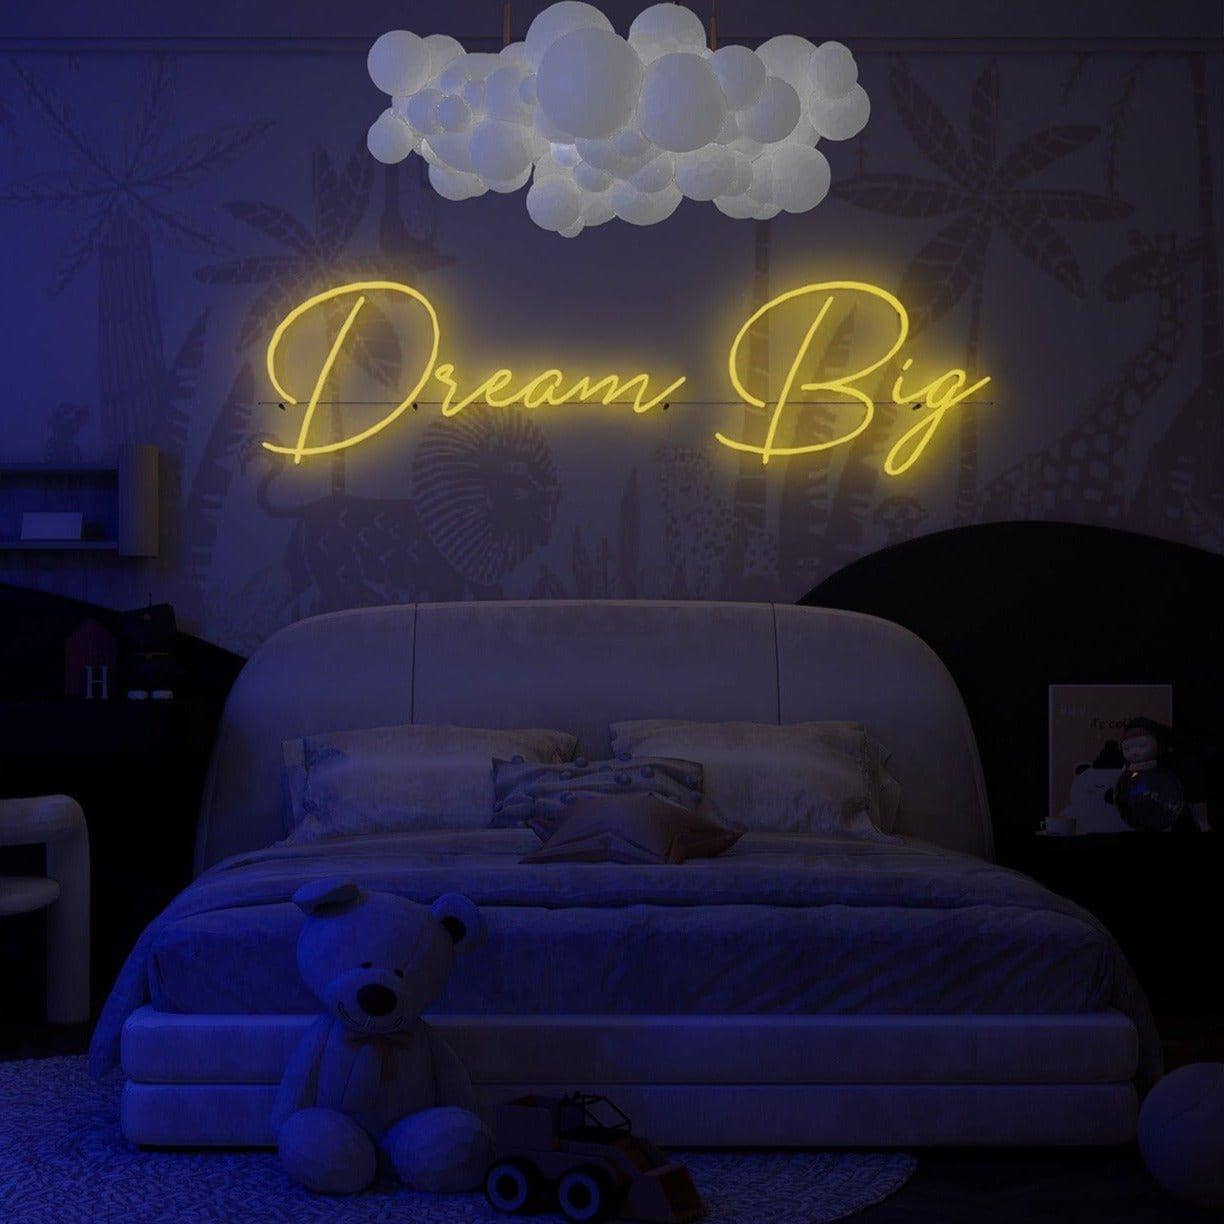 yellow-neon-lights-illuminated-at-night-for-display-in-the-bedroom-dream-big